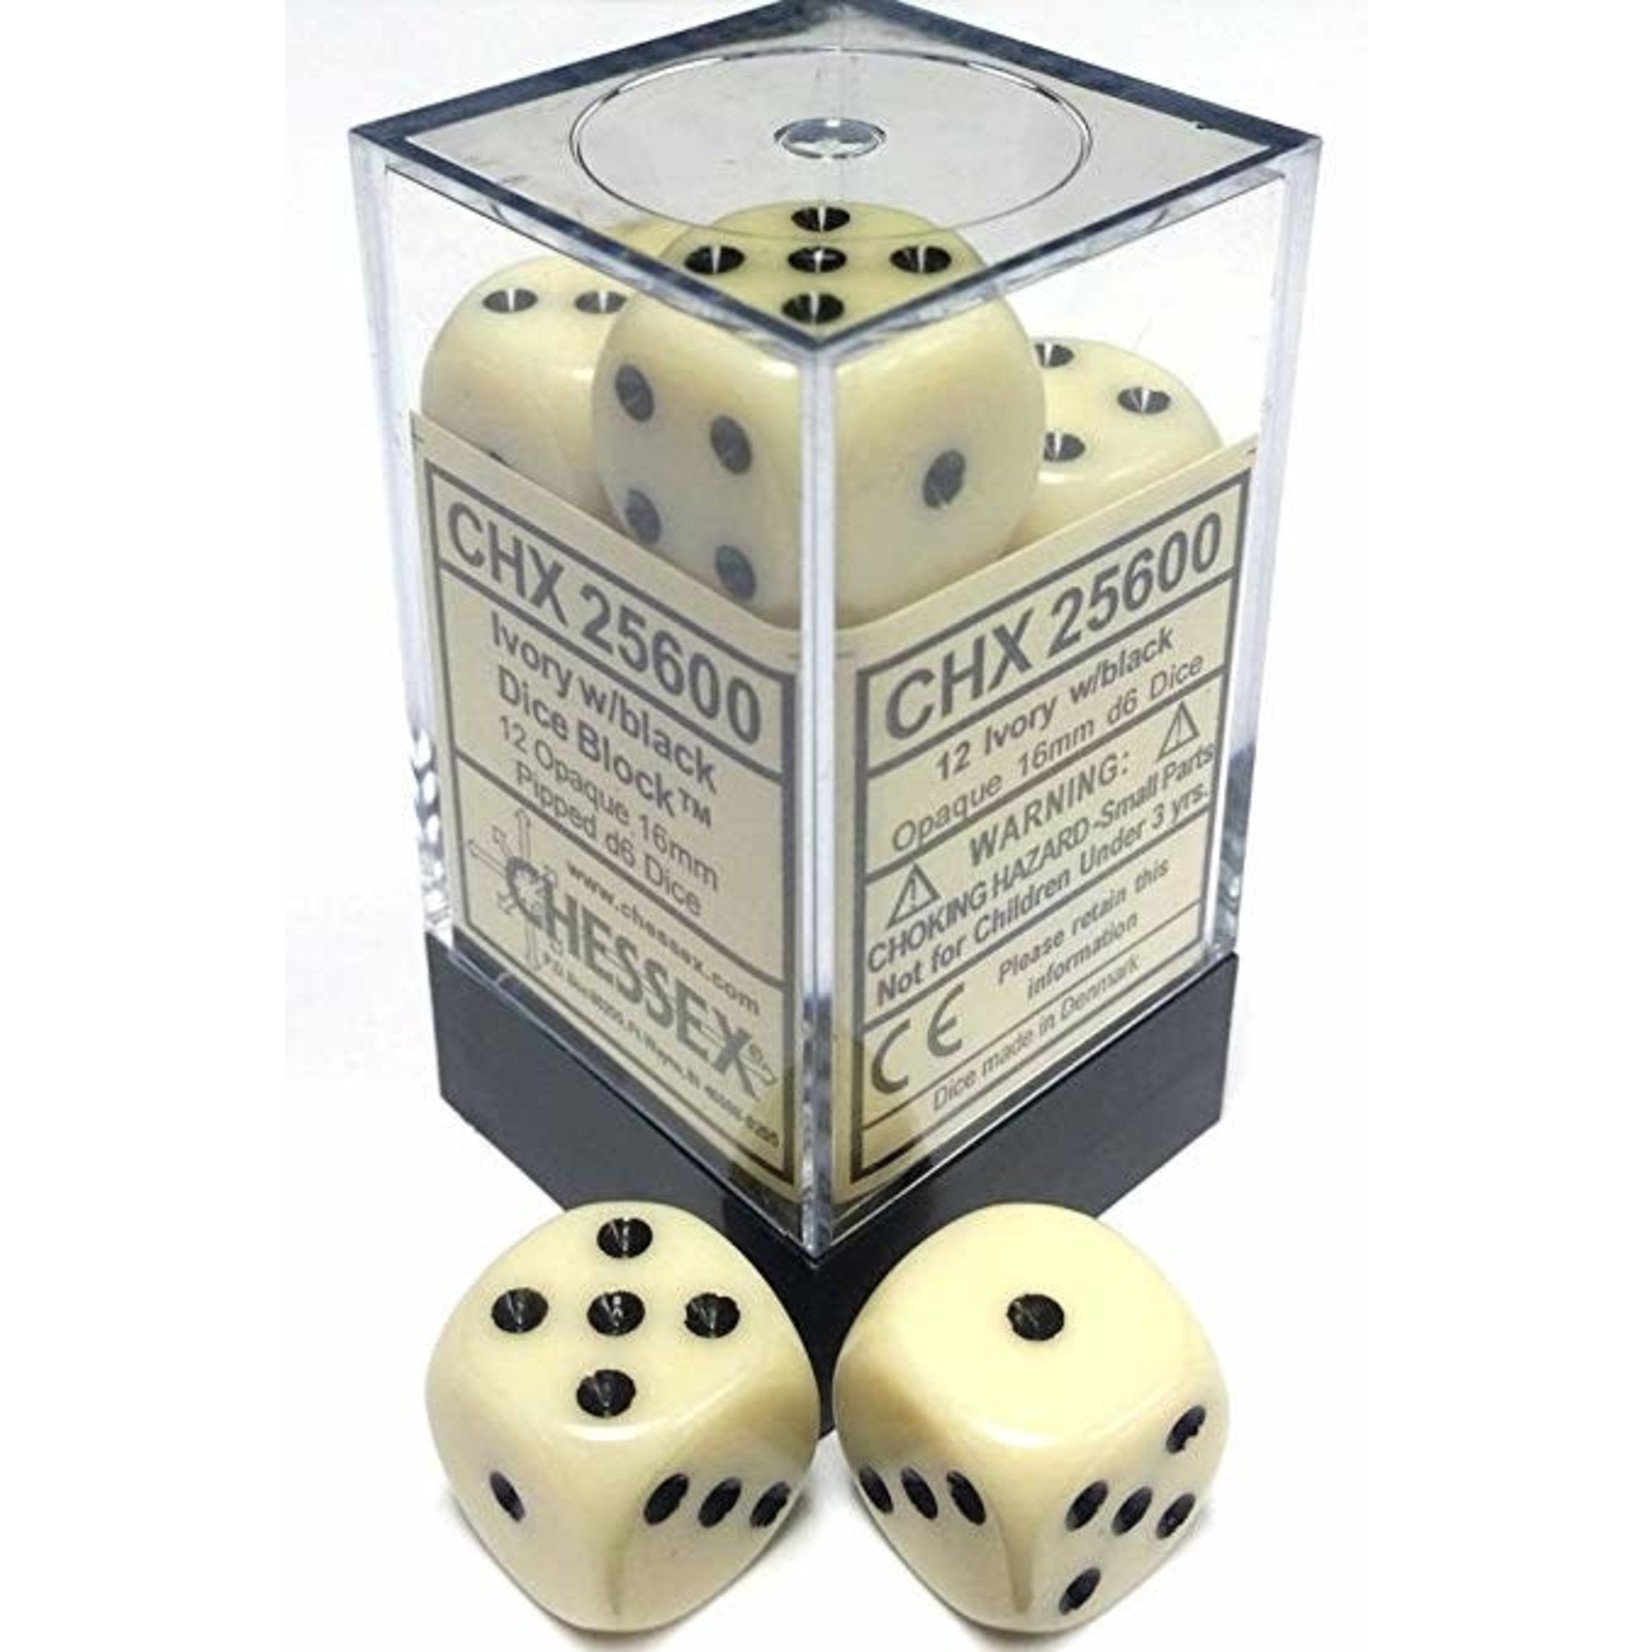 Chessex Opaque Ivory Black 16mm d6 (12)